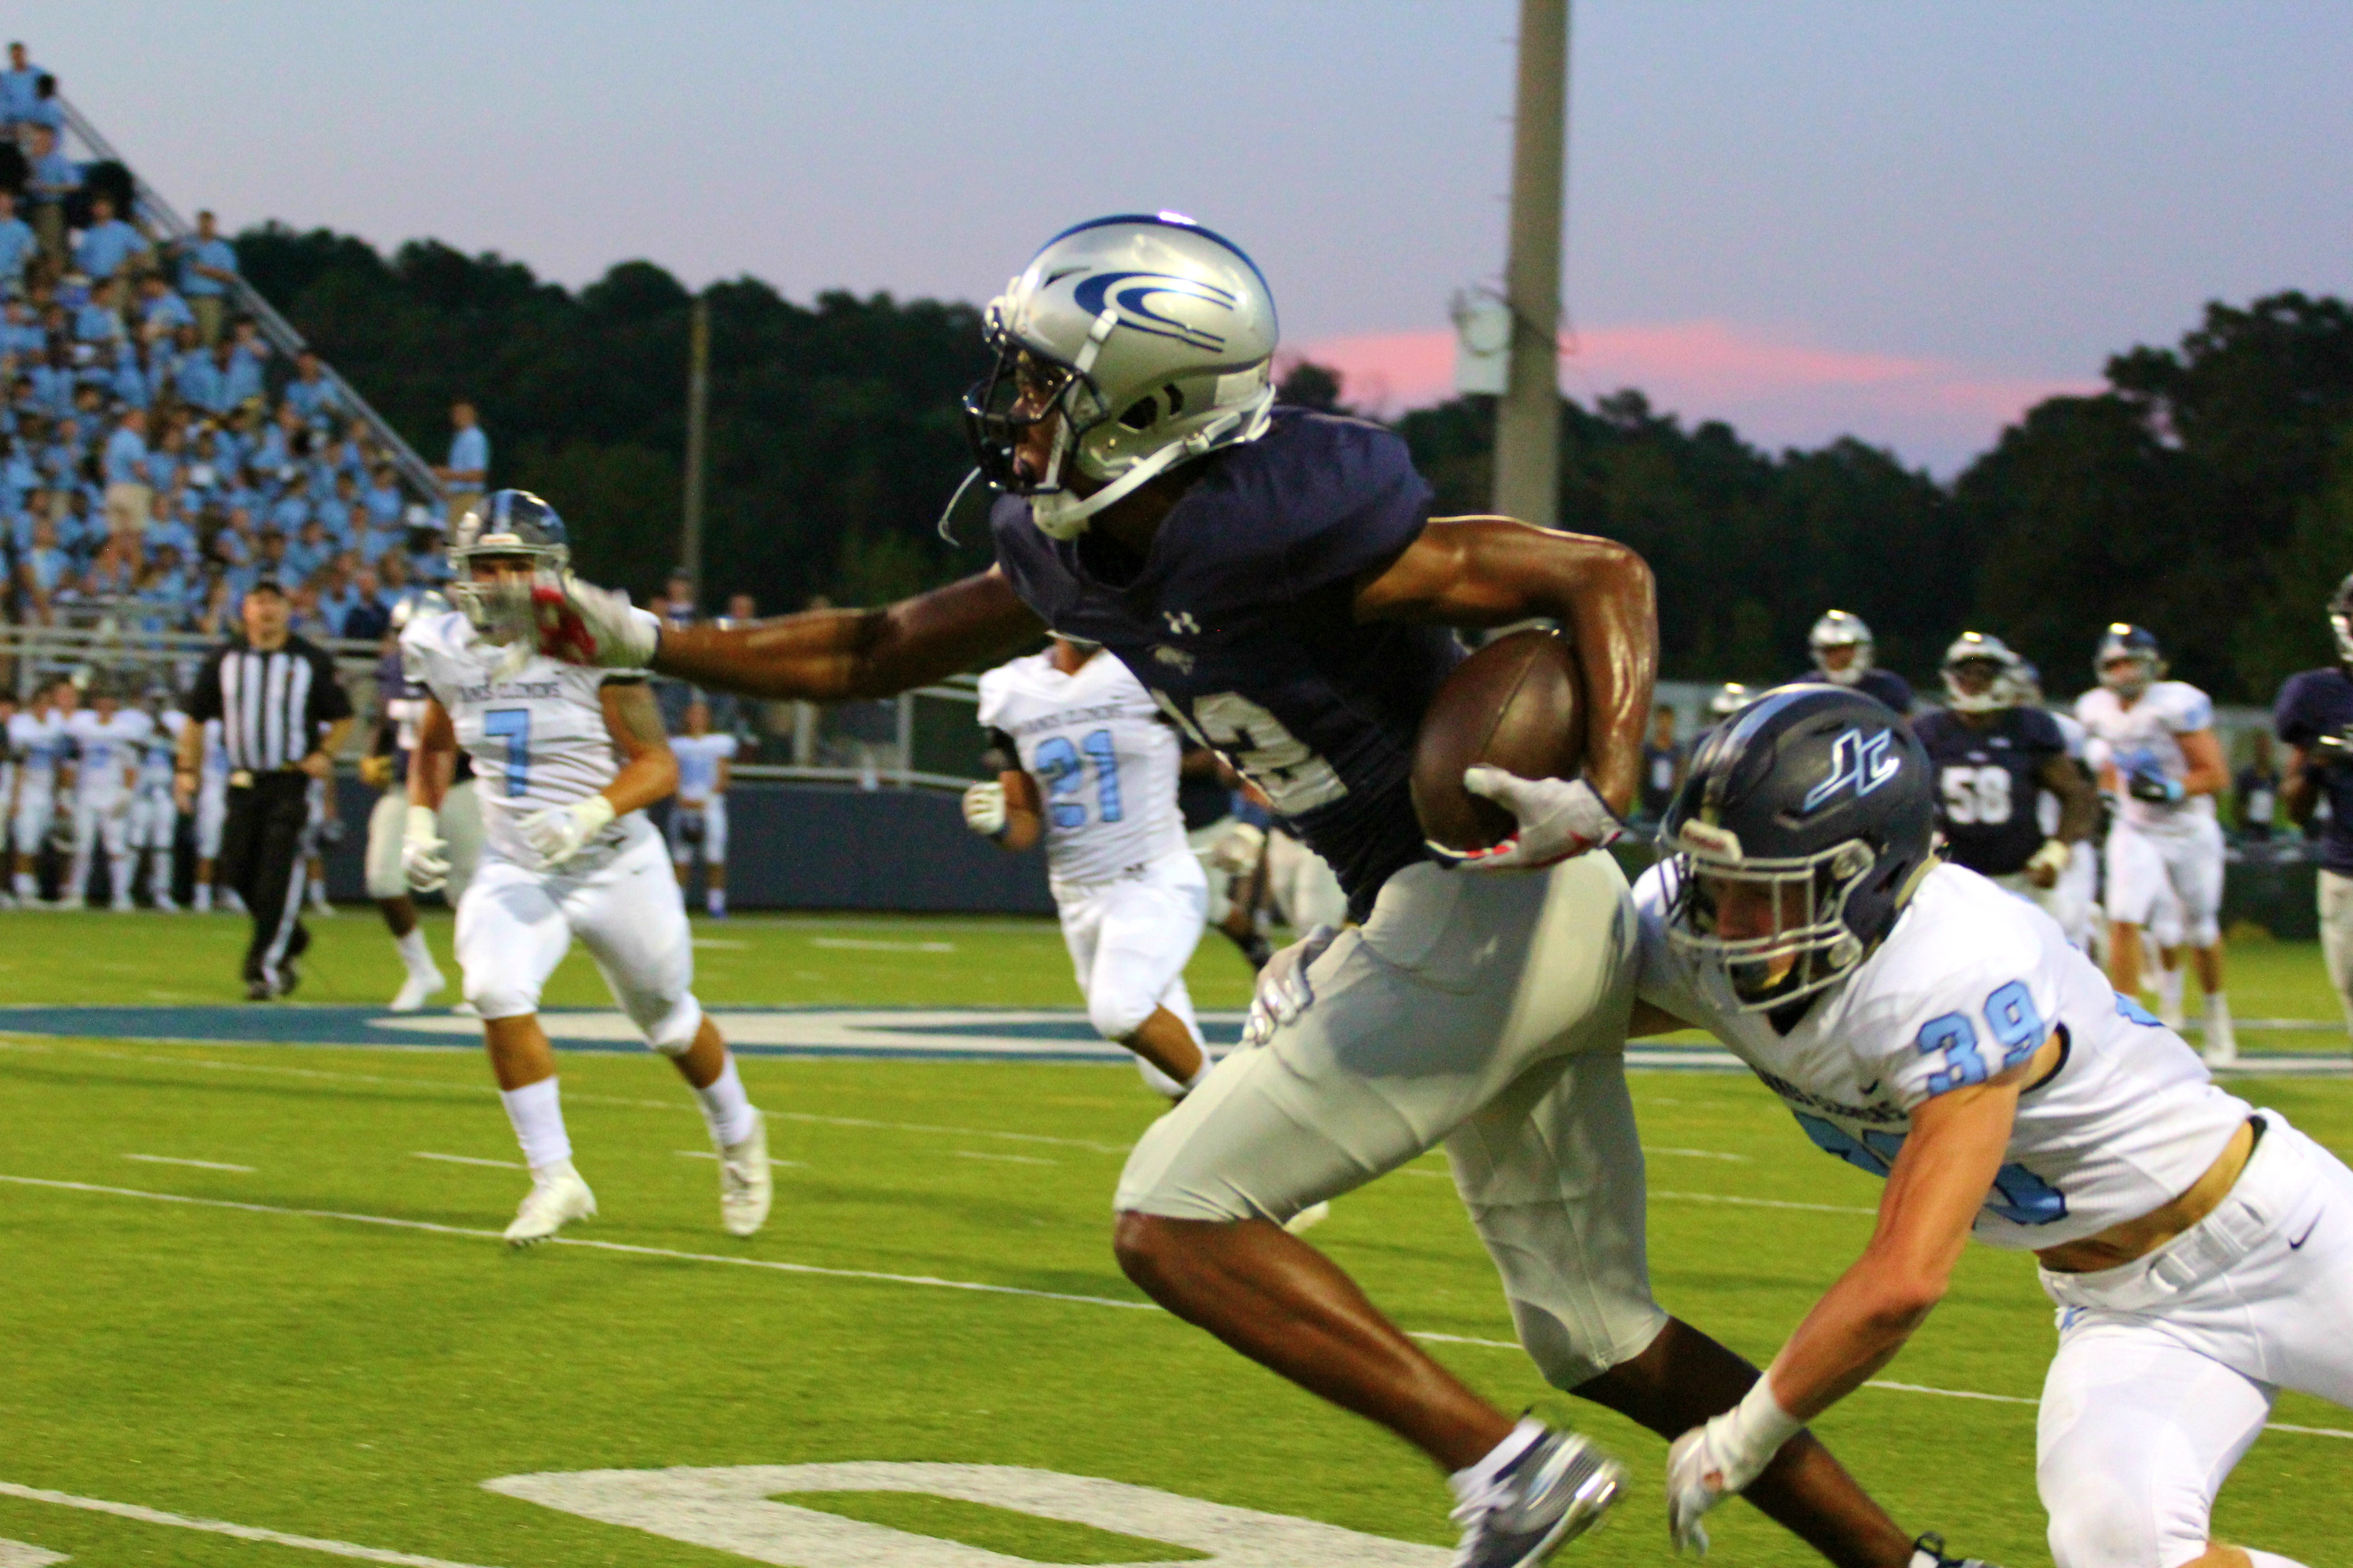 Clay-Chalkville returns home in hopes of cementing final playoff spot